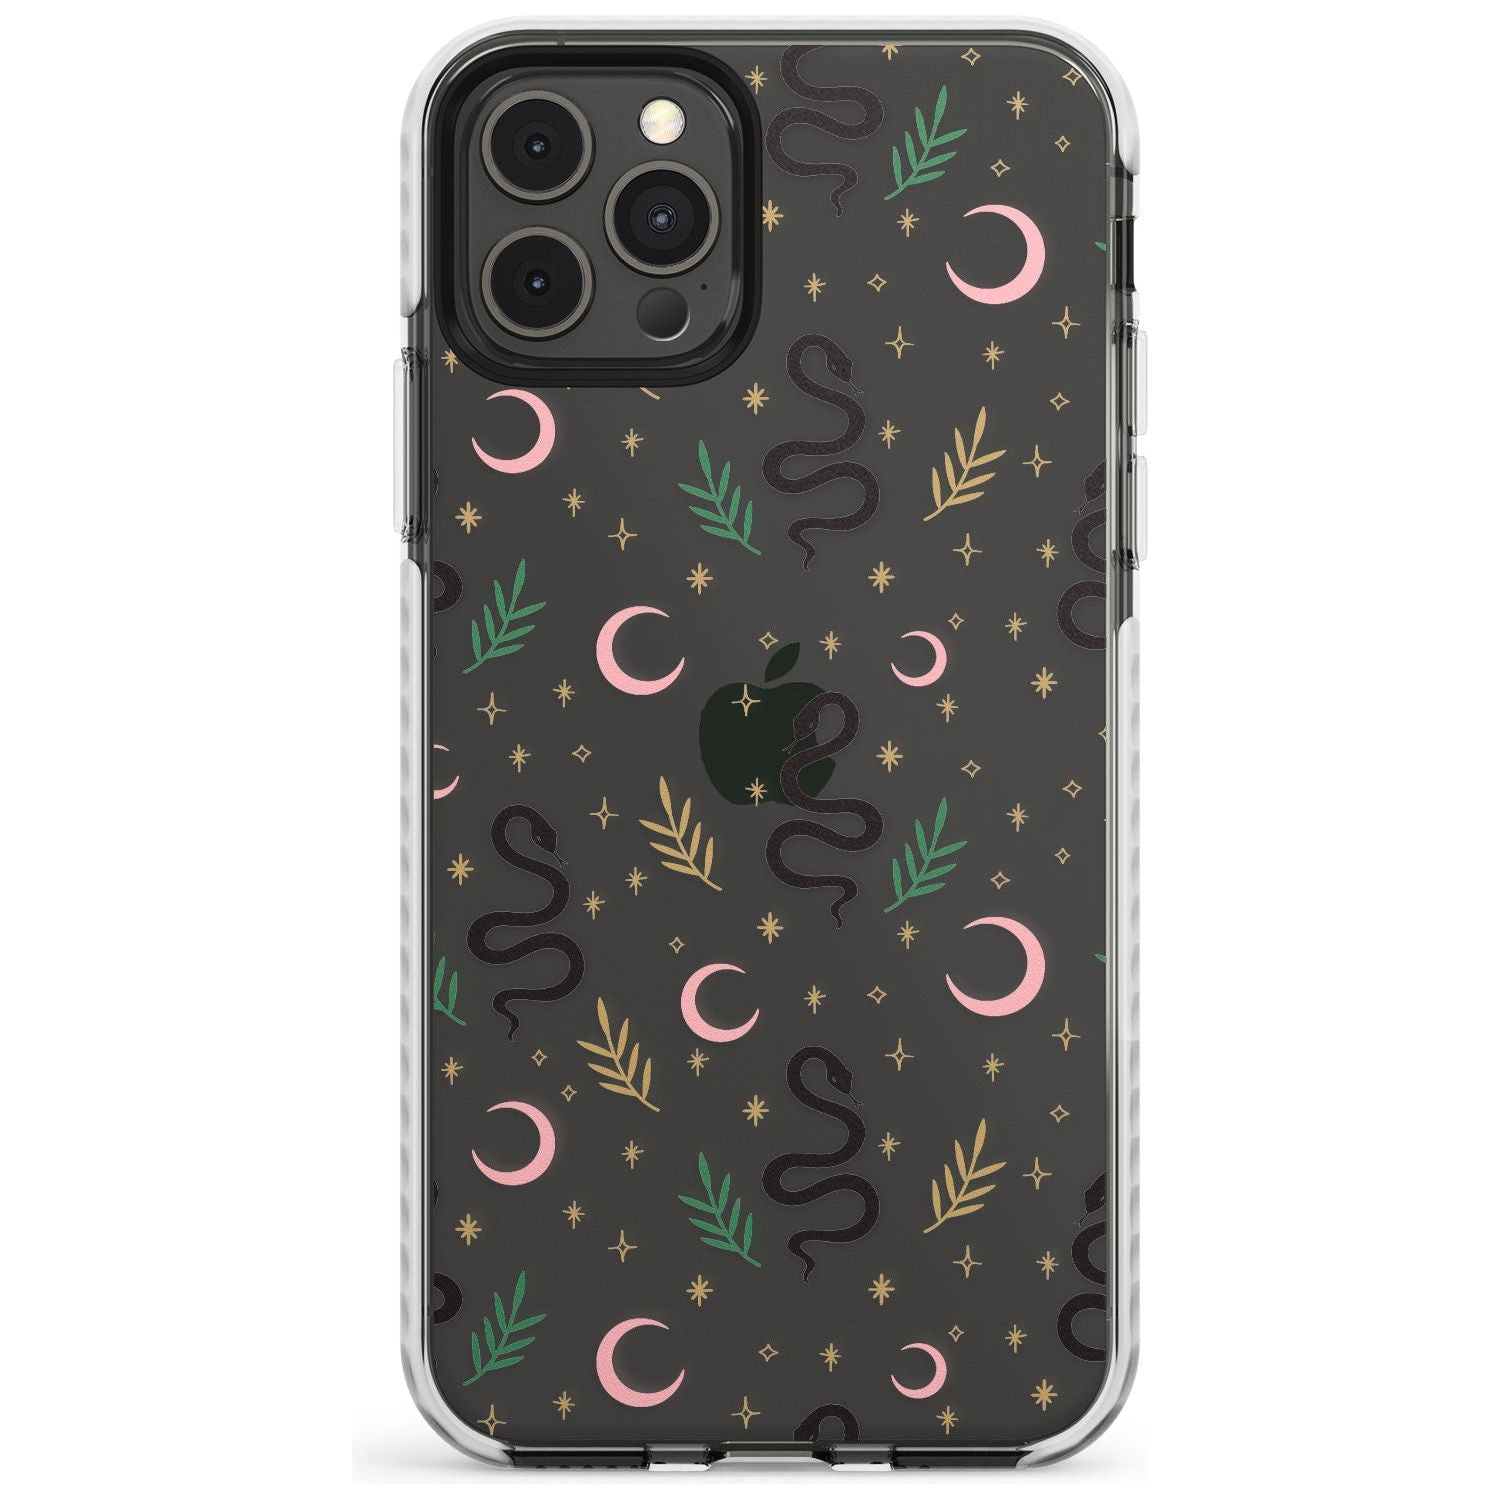 Snake & Moon Pattern (Clear) Slim TPU Phone Case for iPhone 11 Pro Max